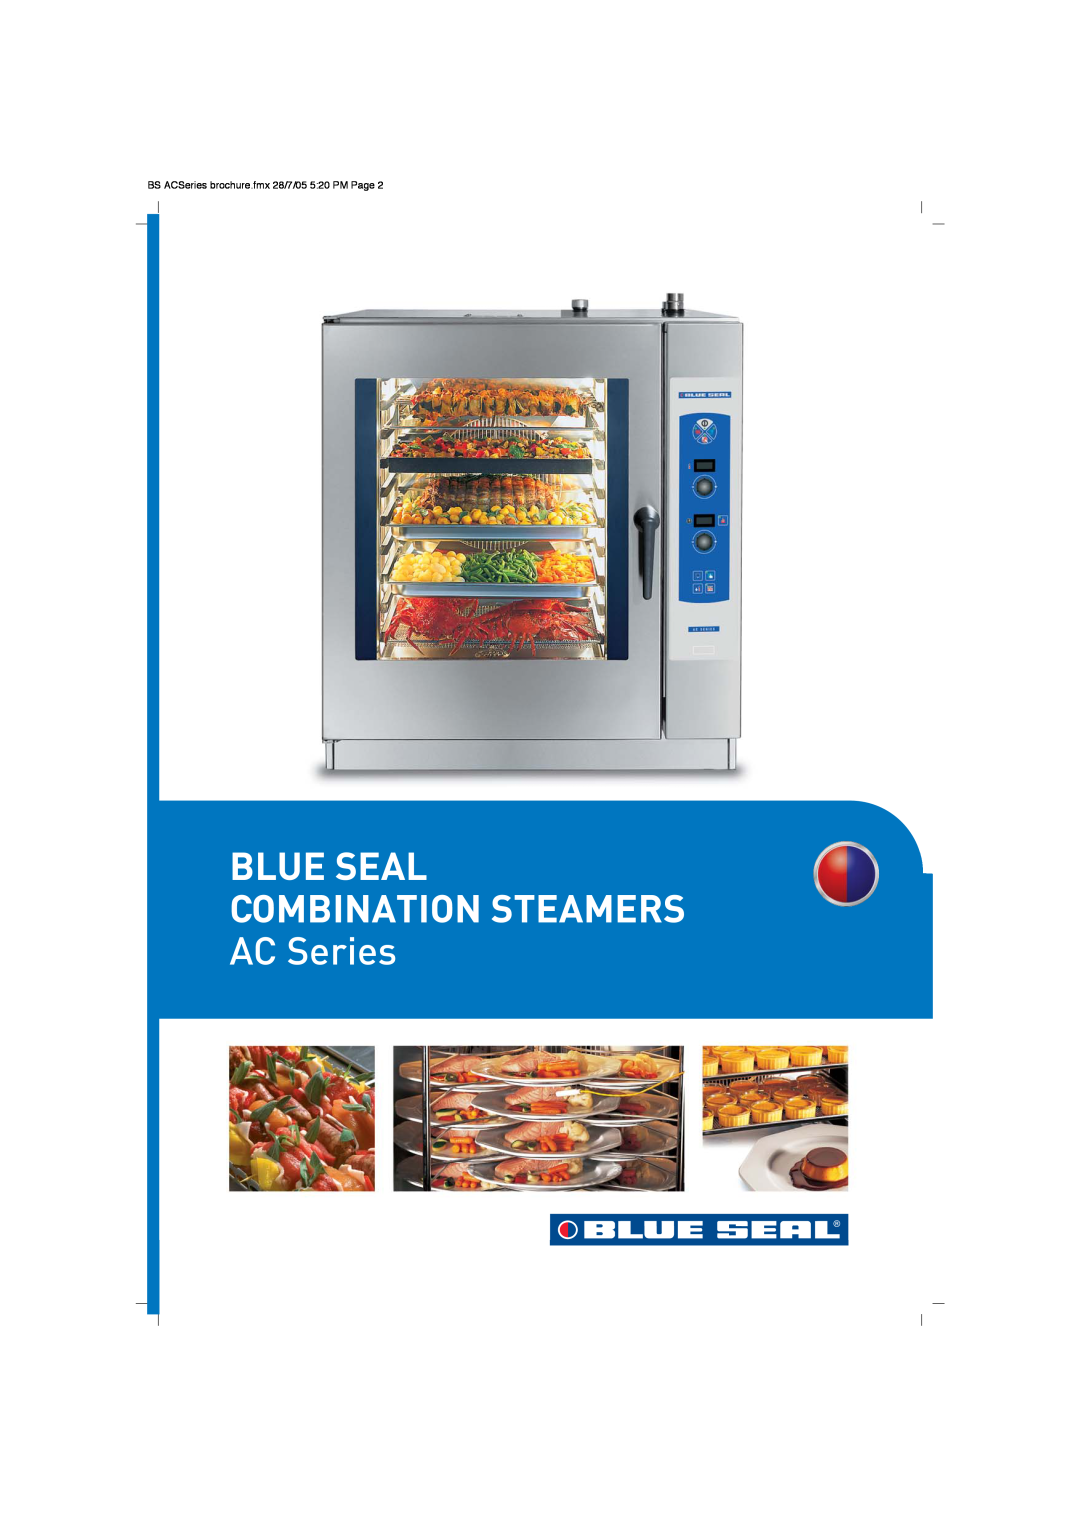 Moffat brochure BLUE SEAL COMBINATION STEAMERS AC Series, BS ACSeries brochure.fmx 28/7/05 520 PM Page 